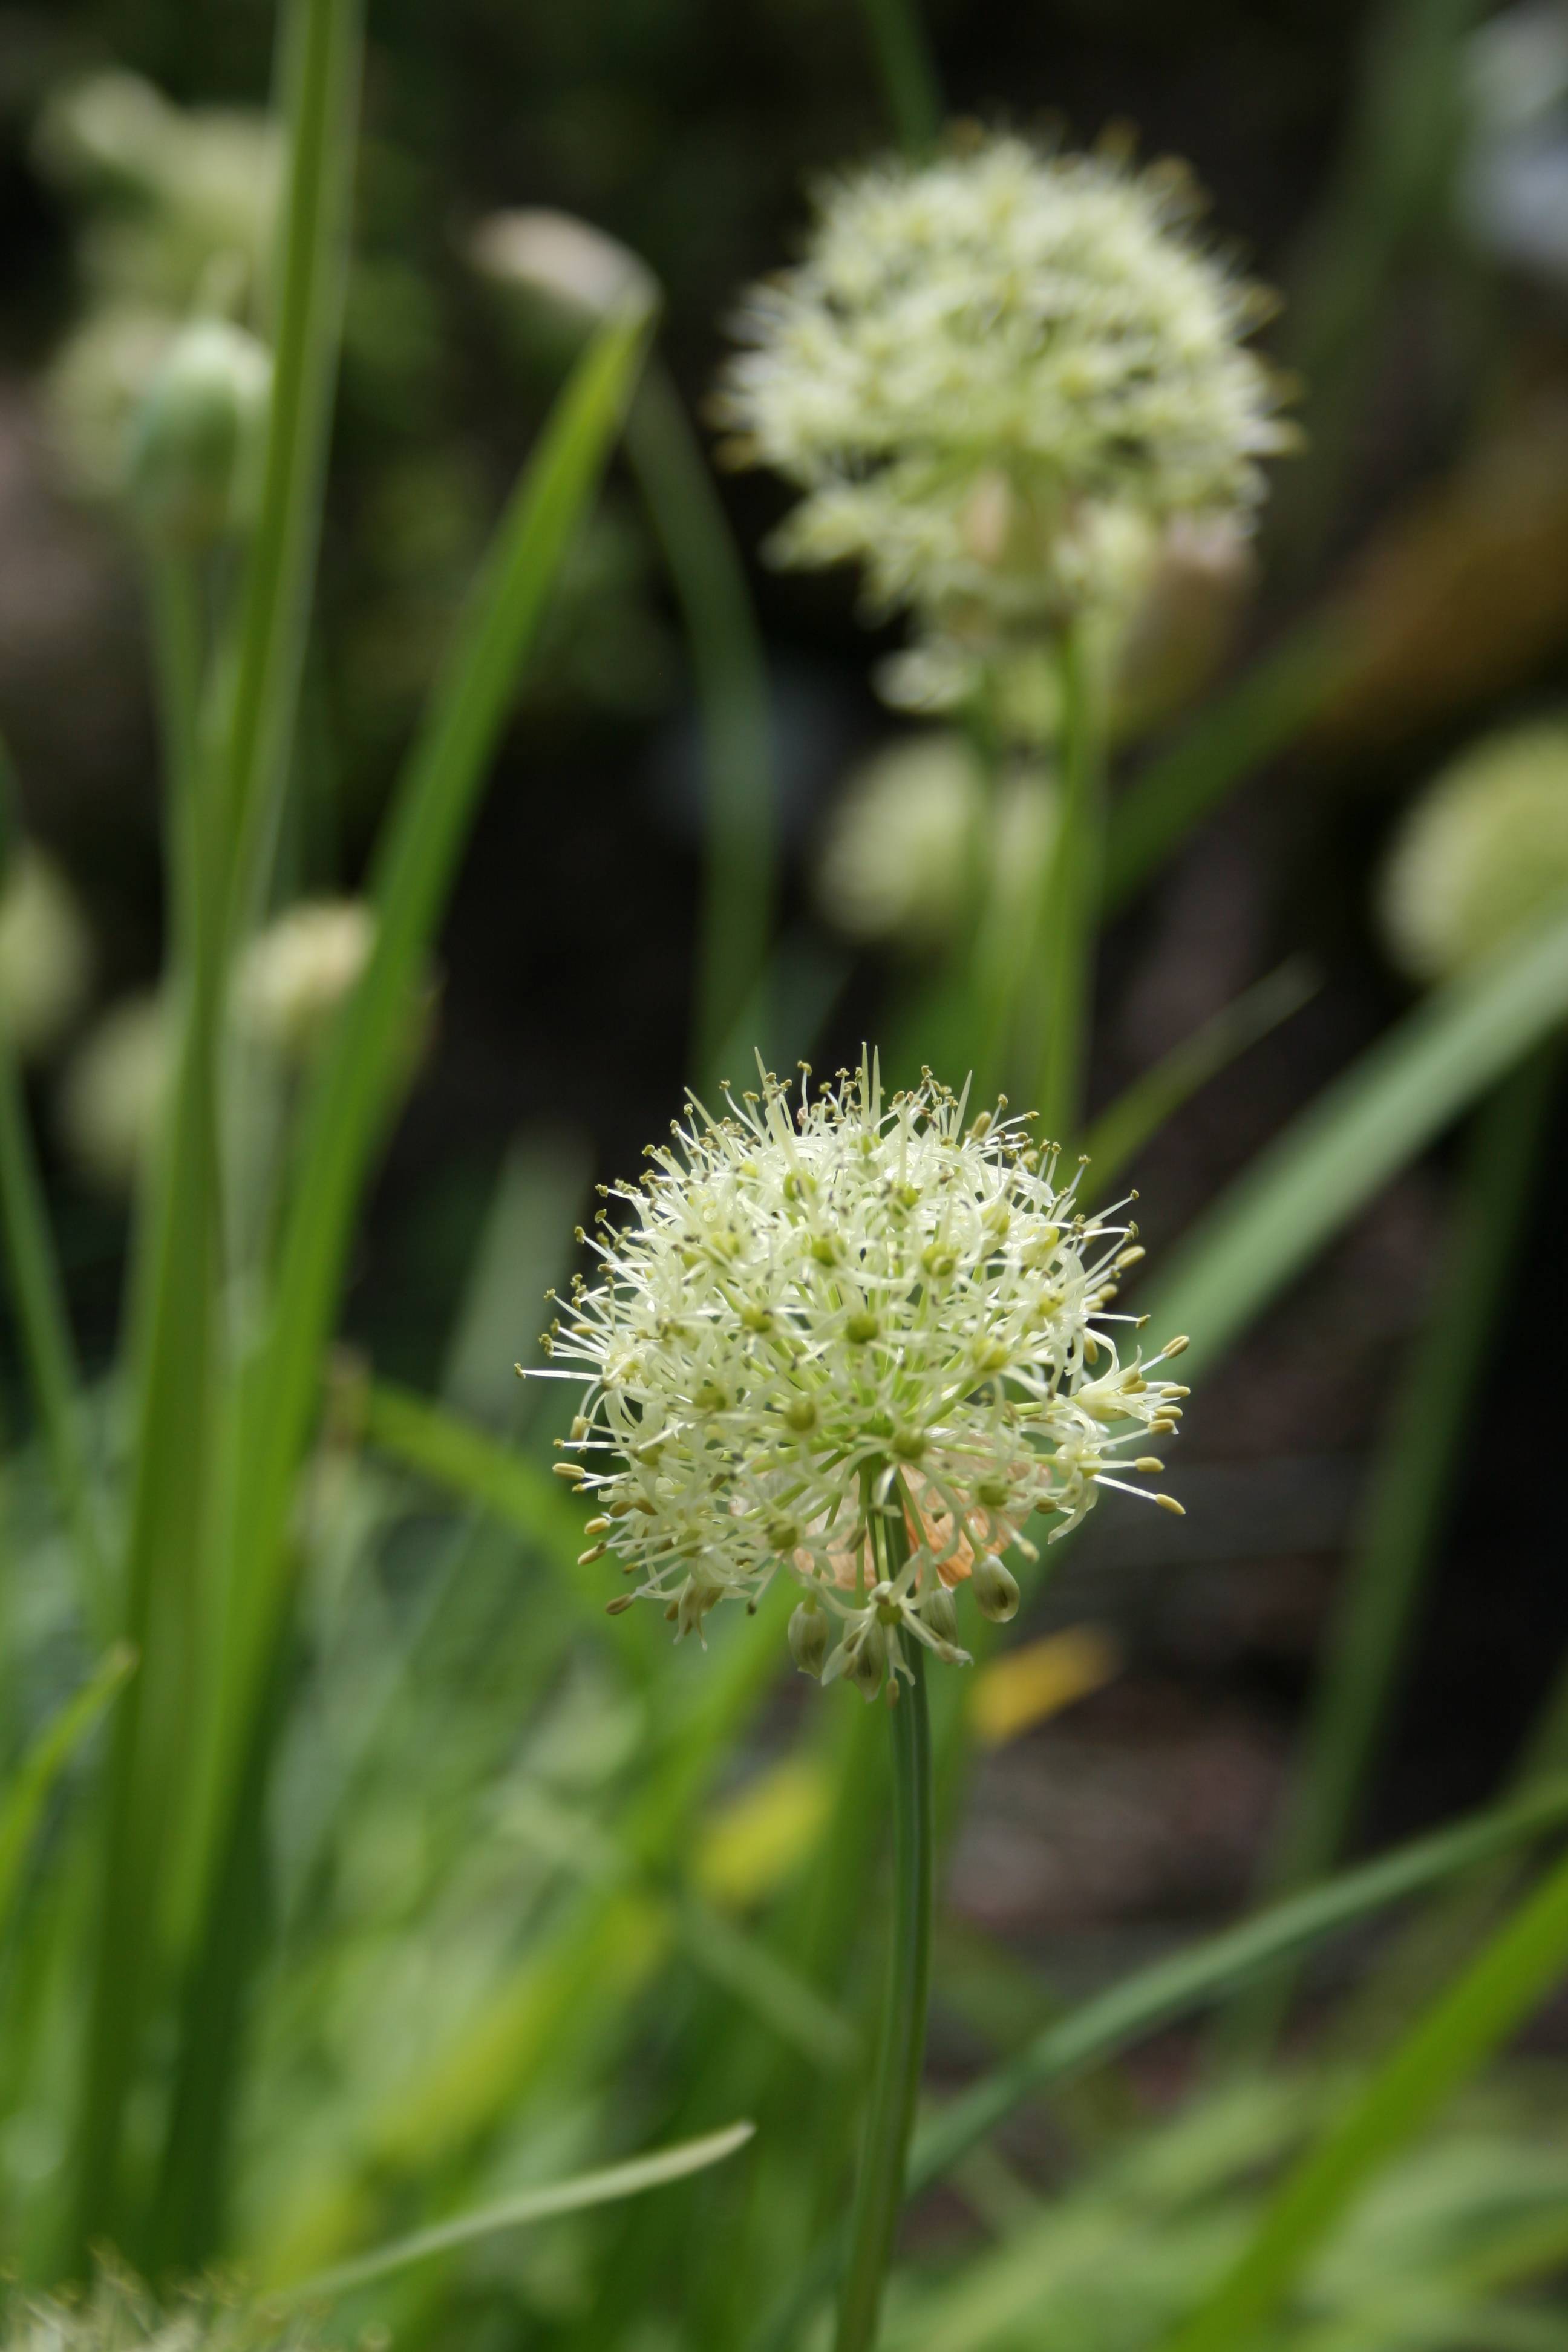 white-lime flowers with green foliage and stems